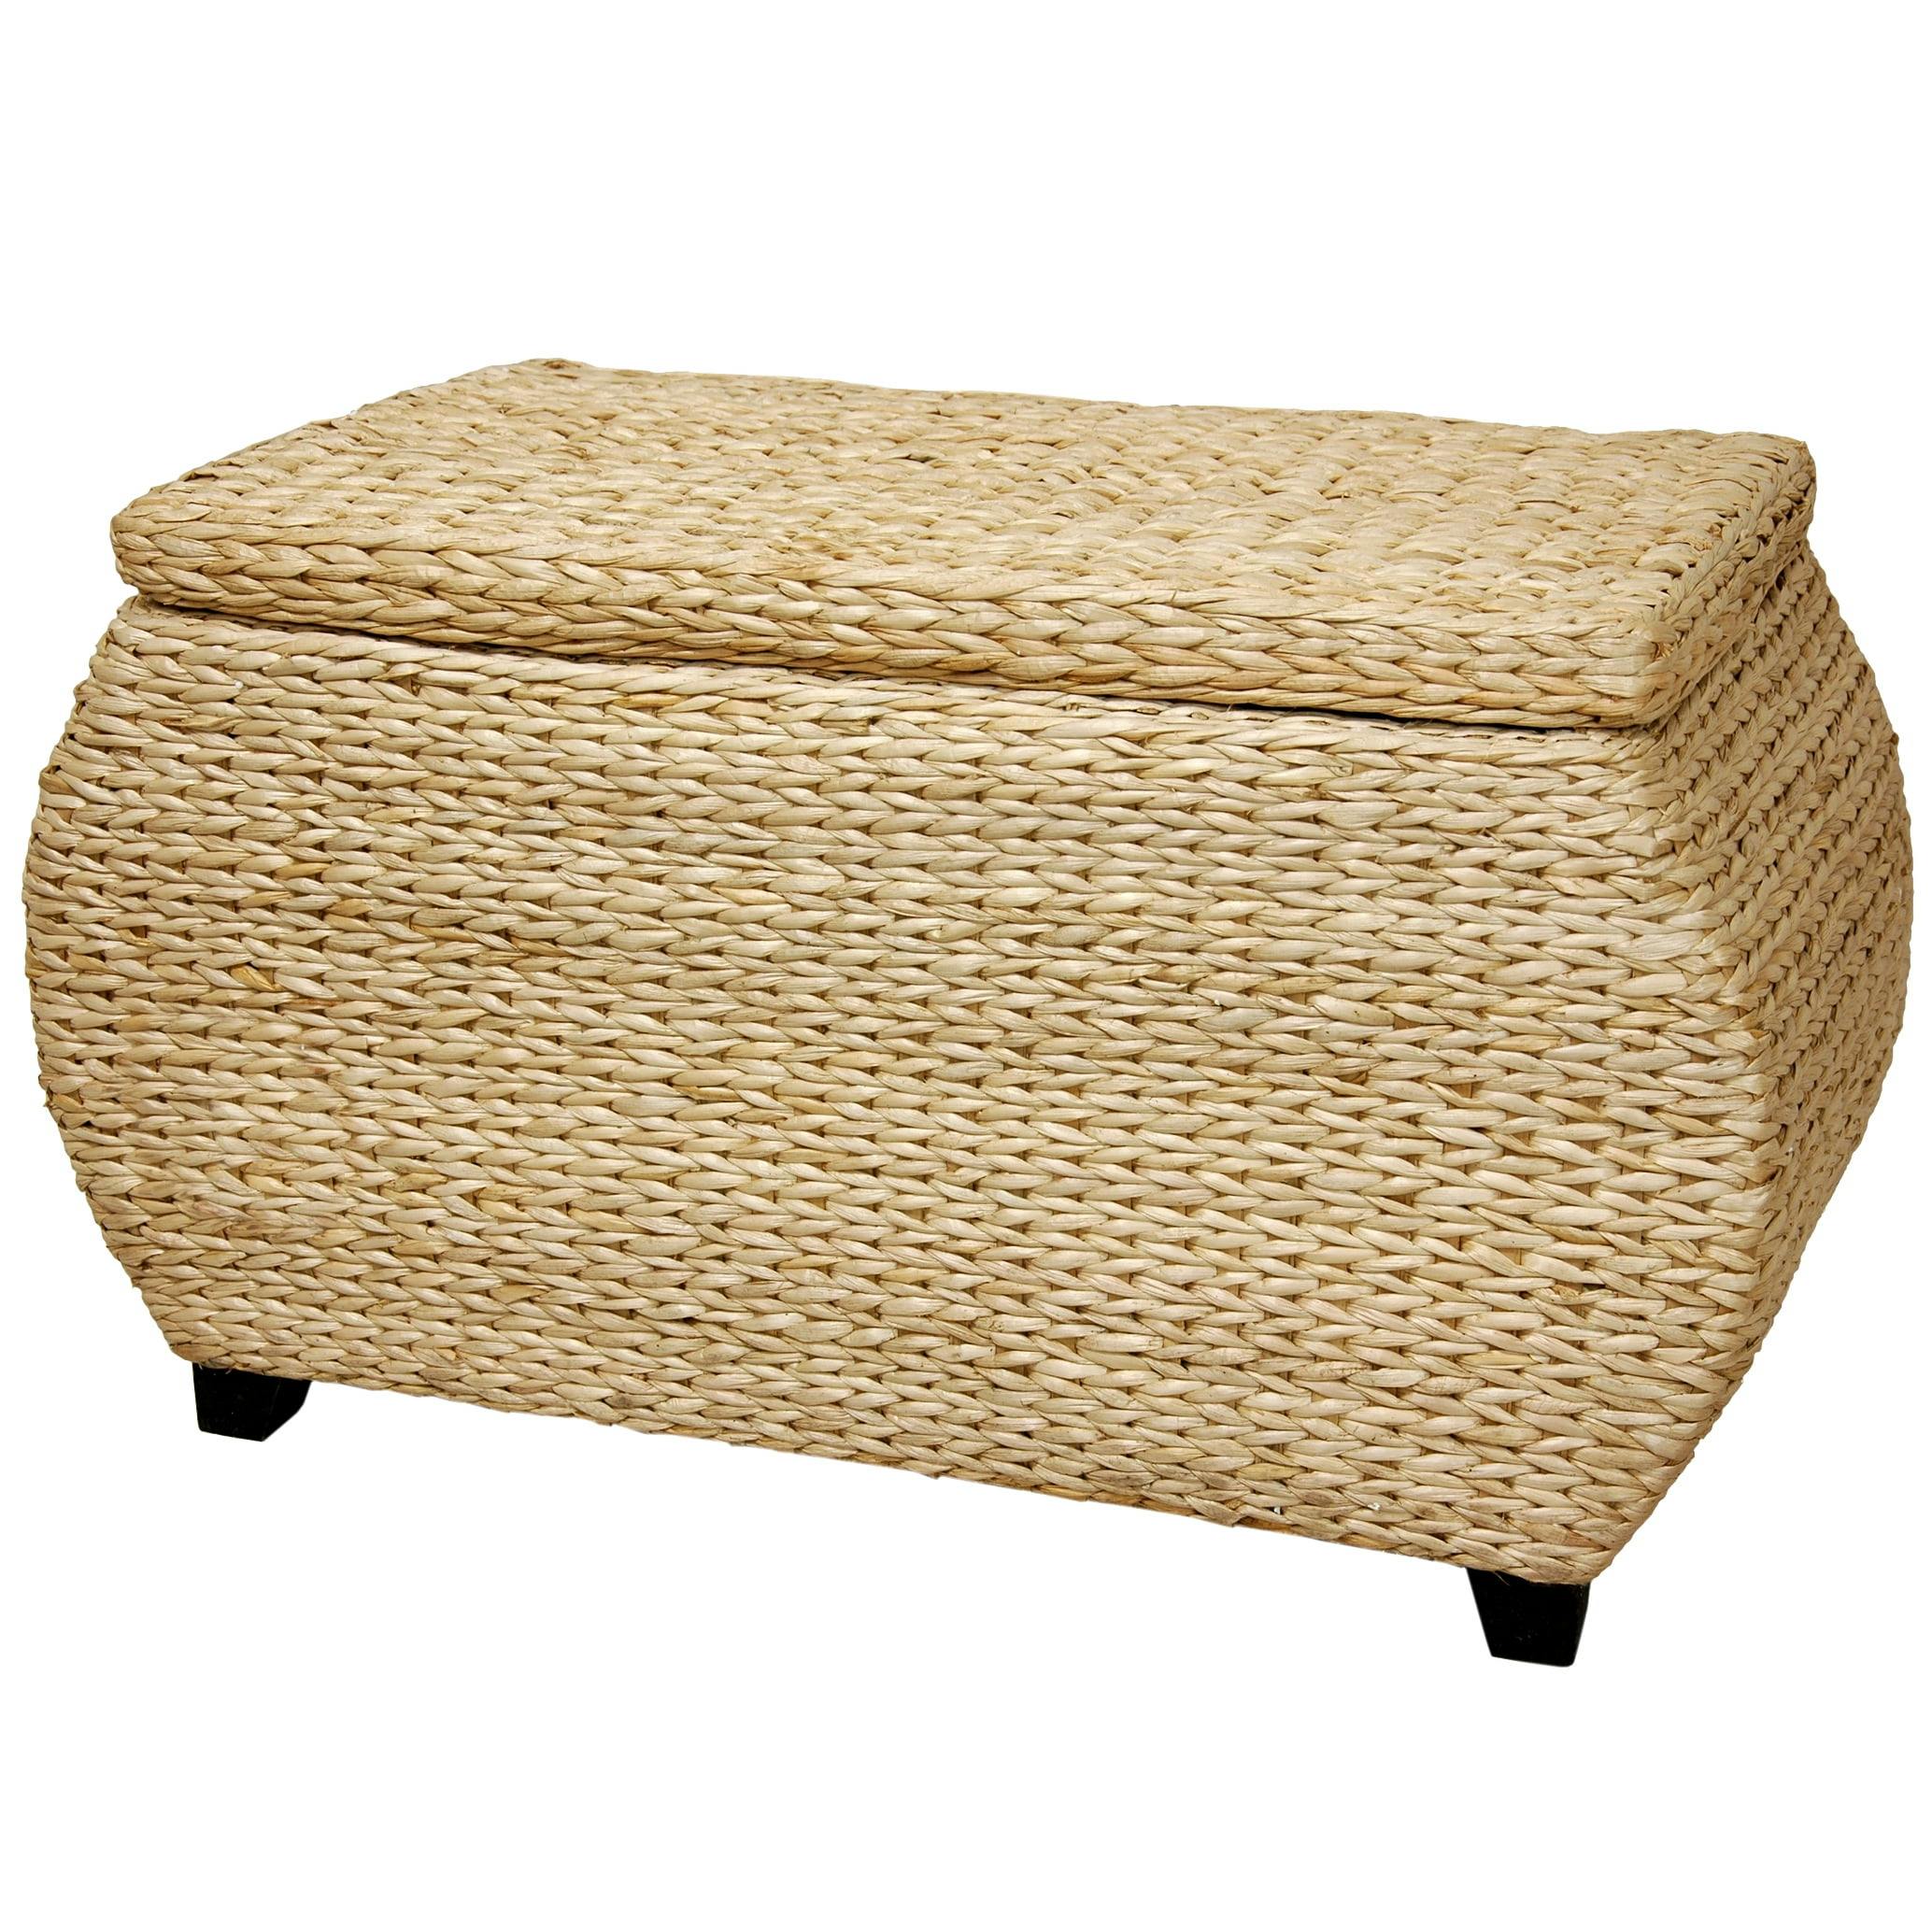 Eco-Friendly Woven Water Hyacinth Storage Trunk with Cotton Lining - Natural